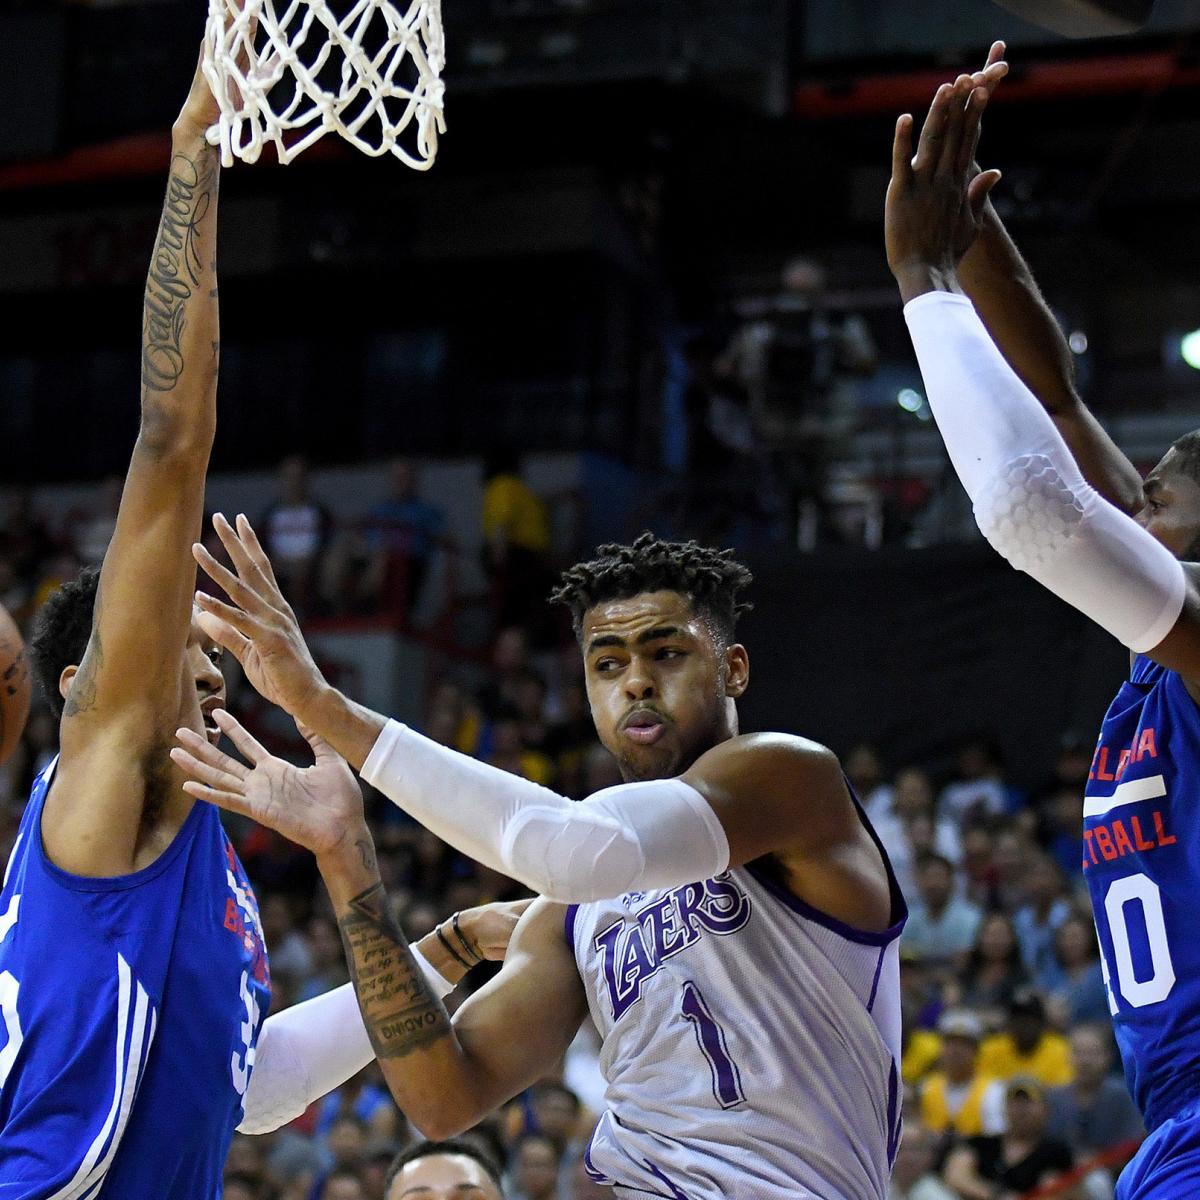 Valentine's buzzer beater gives Bulls title at Summer League